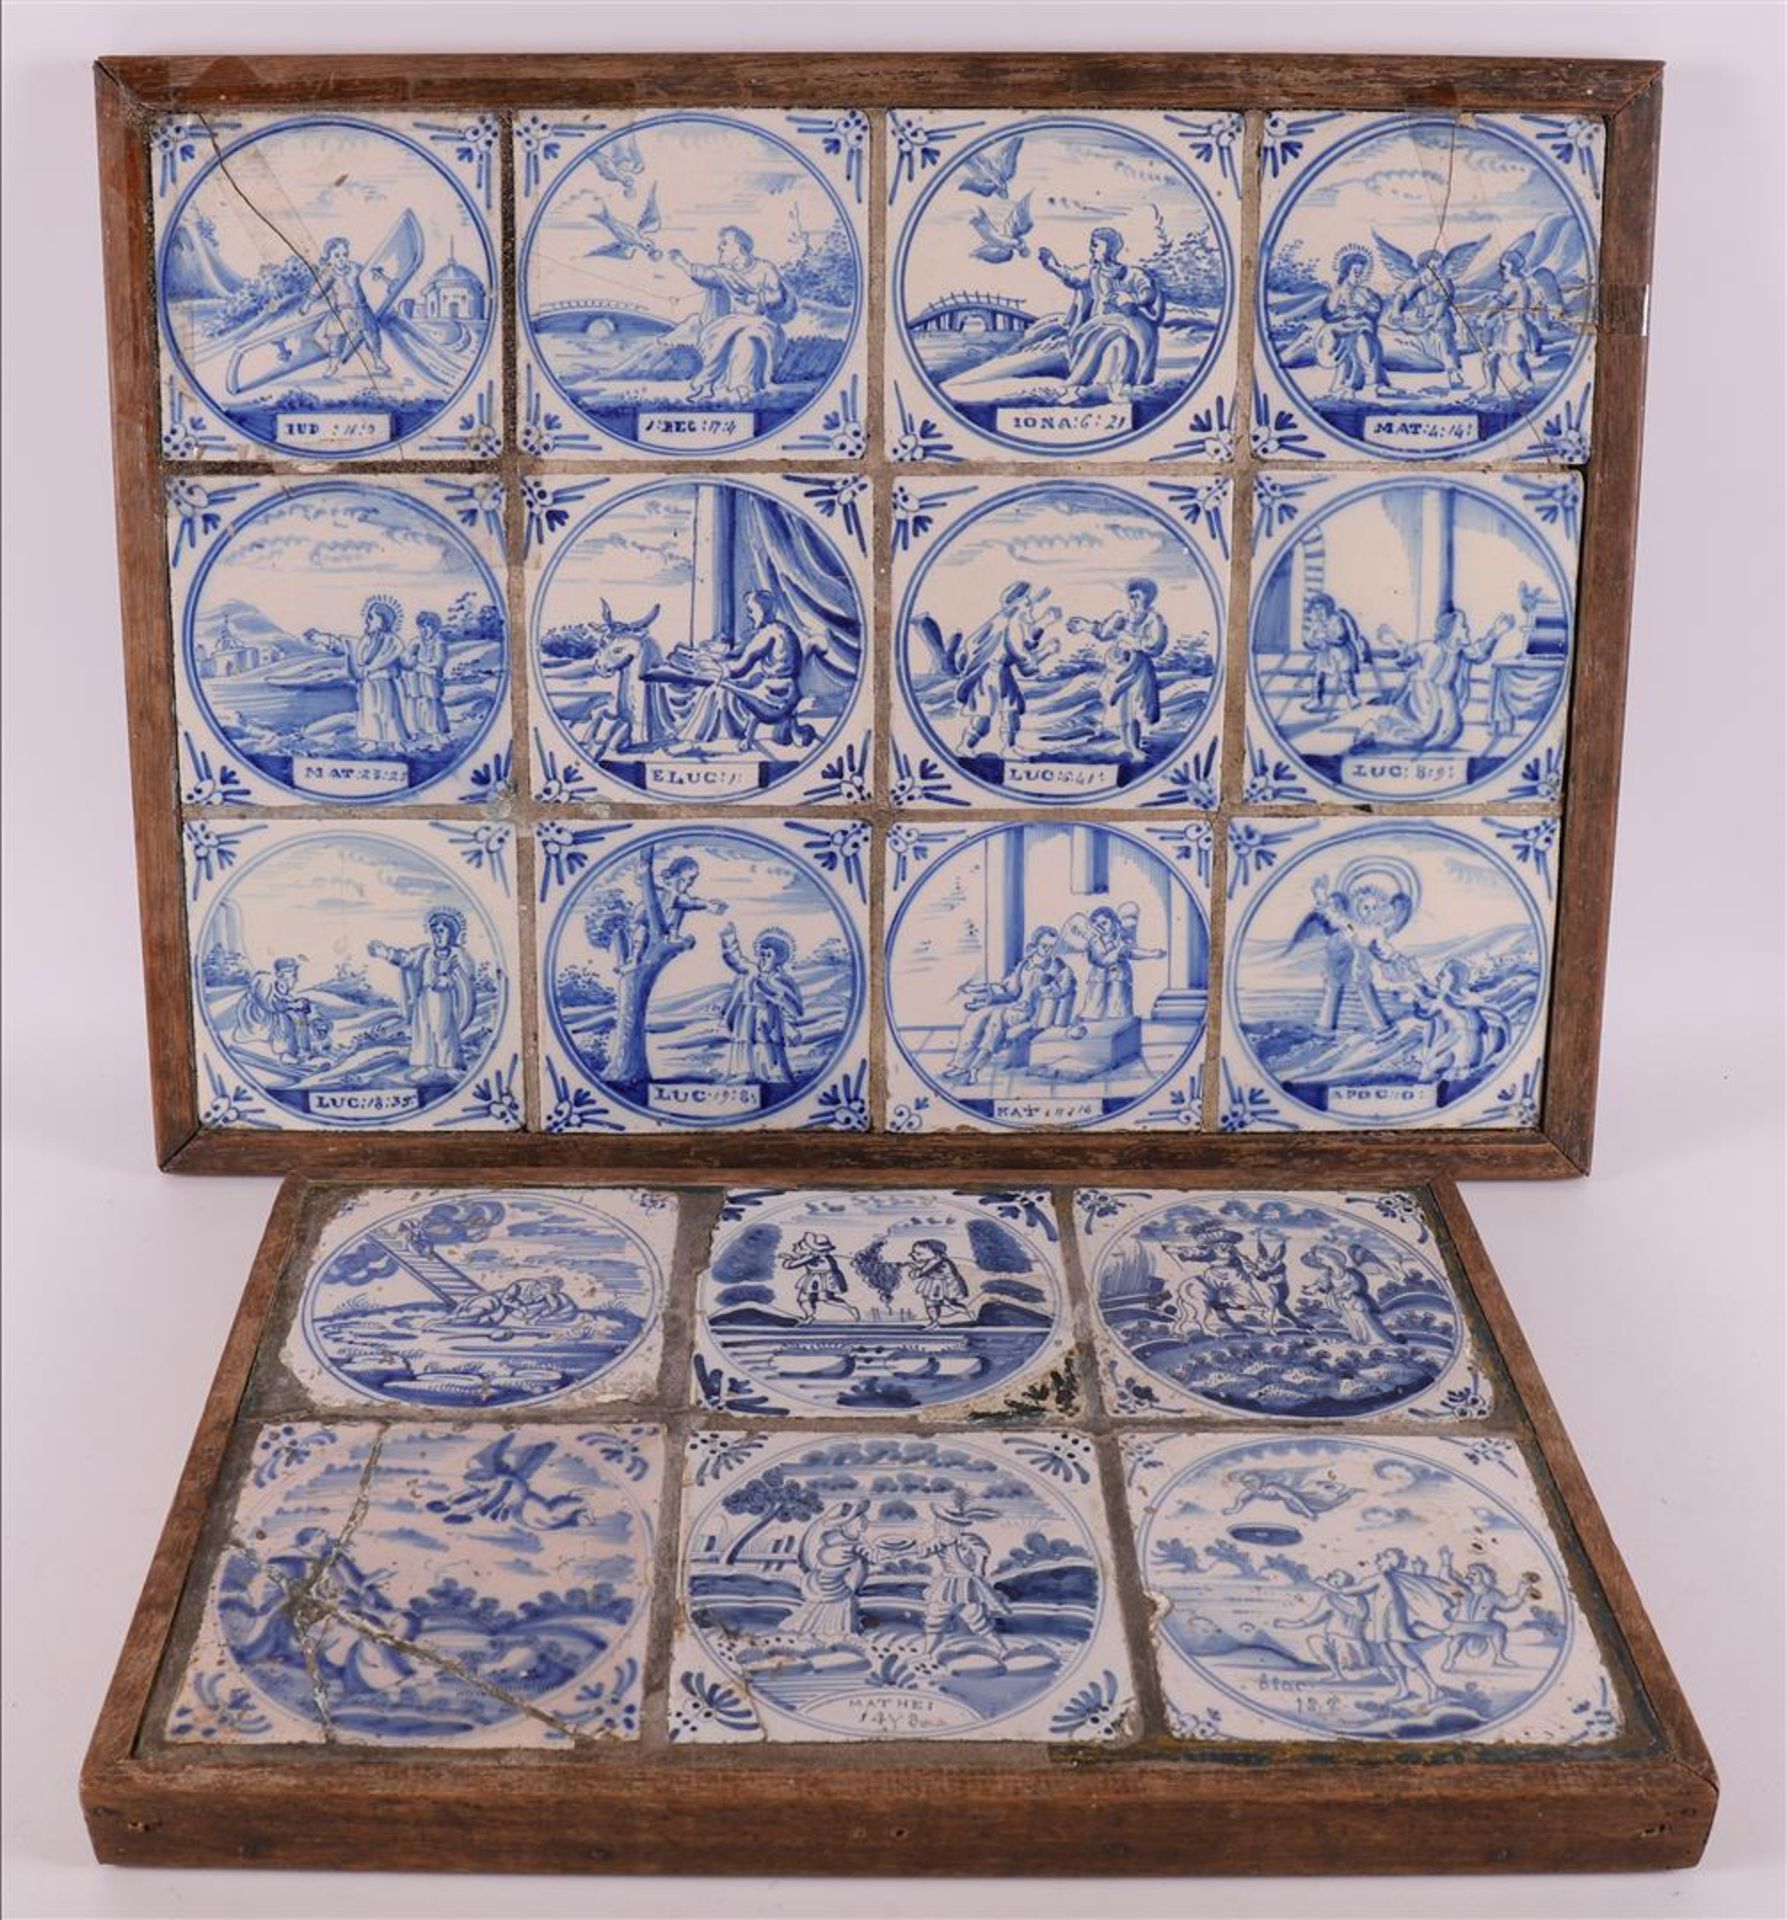 A twelve-step tile tableau with blue/white religious tiles, 18th century.